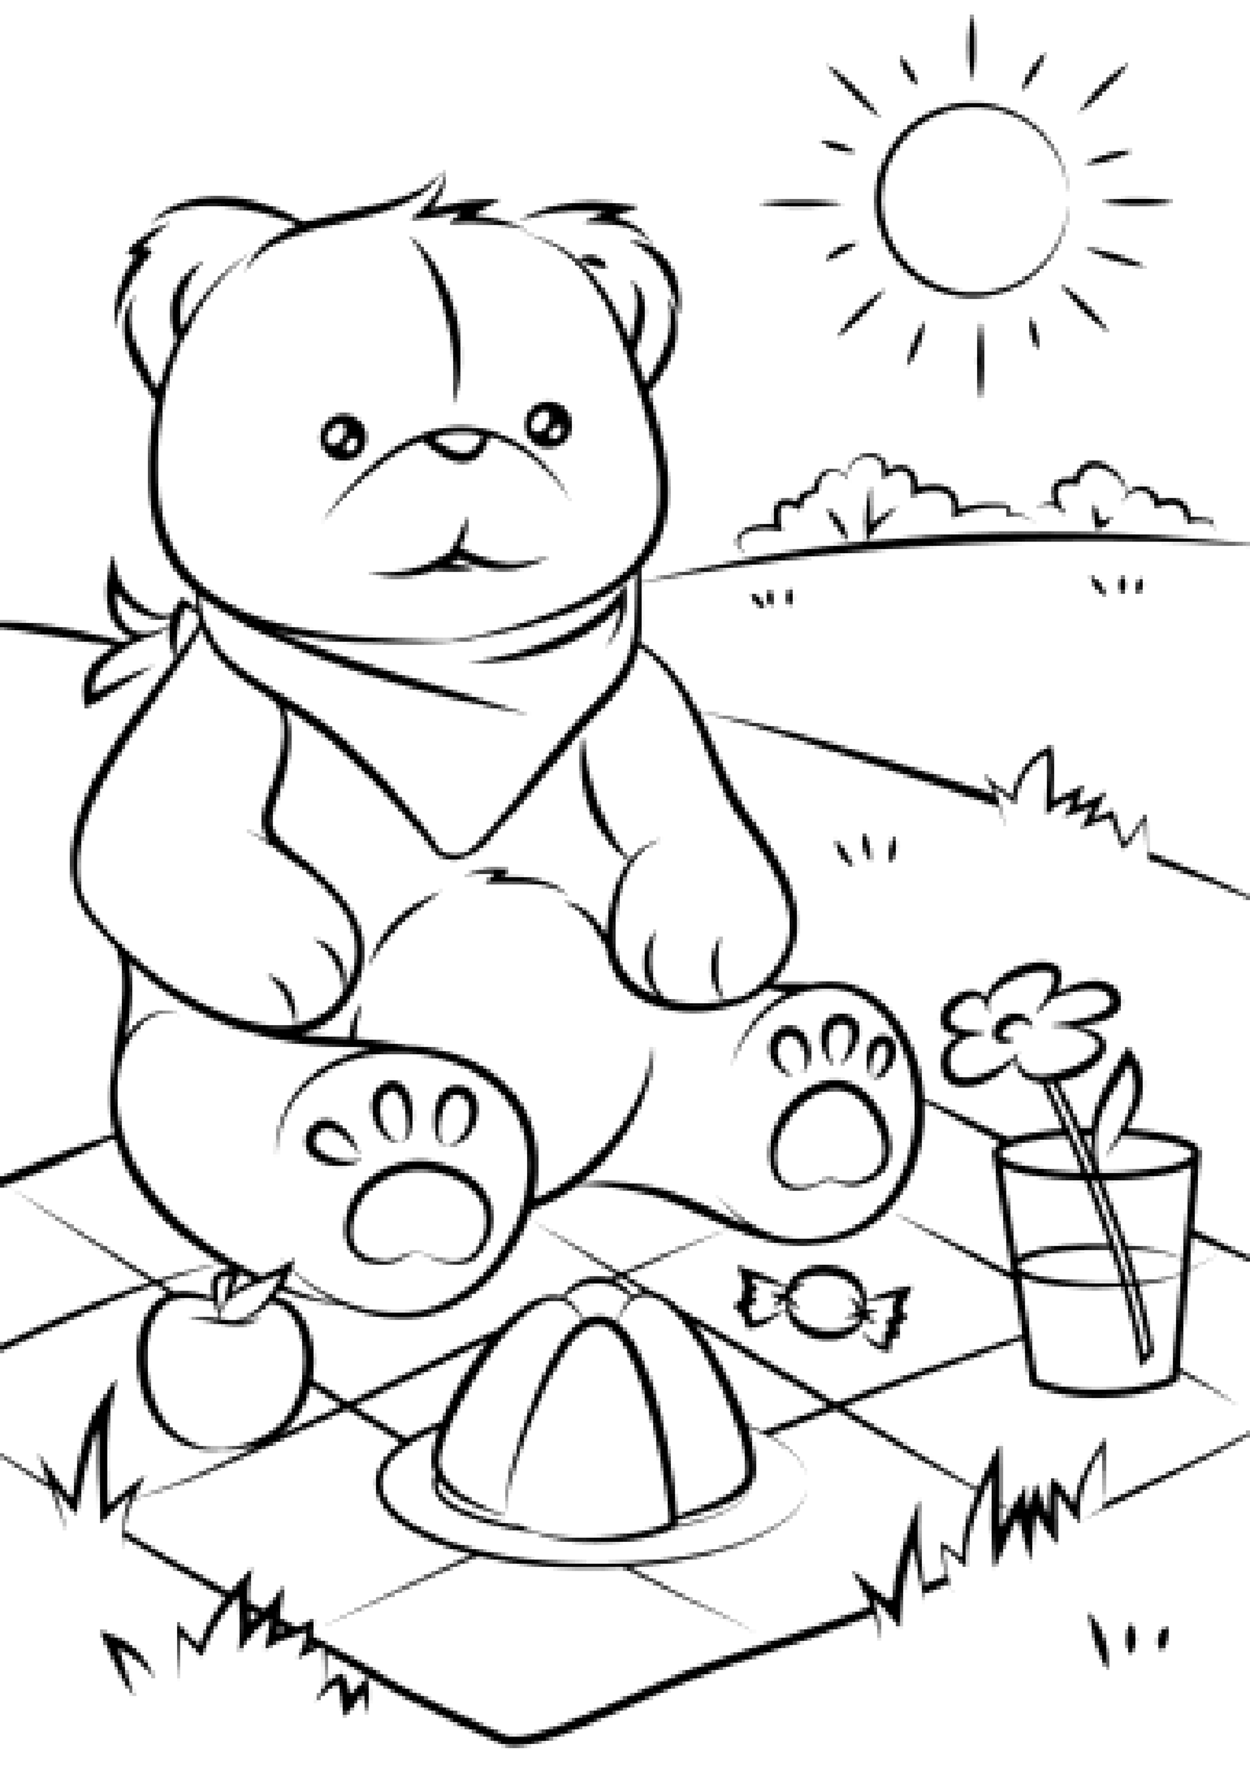 Join this bear for a great picnic!